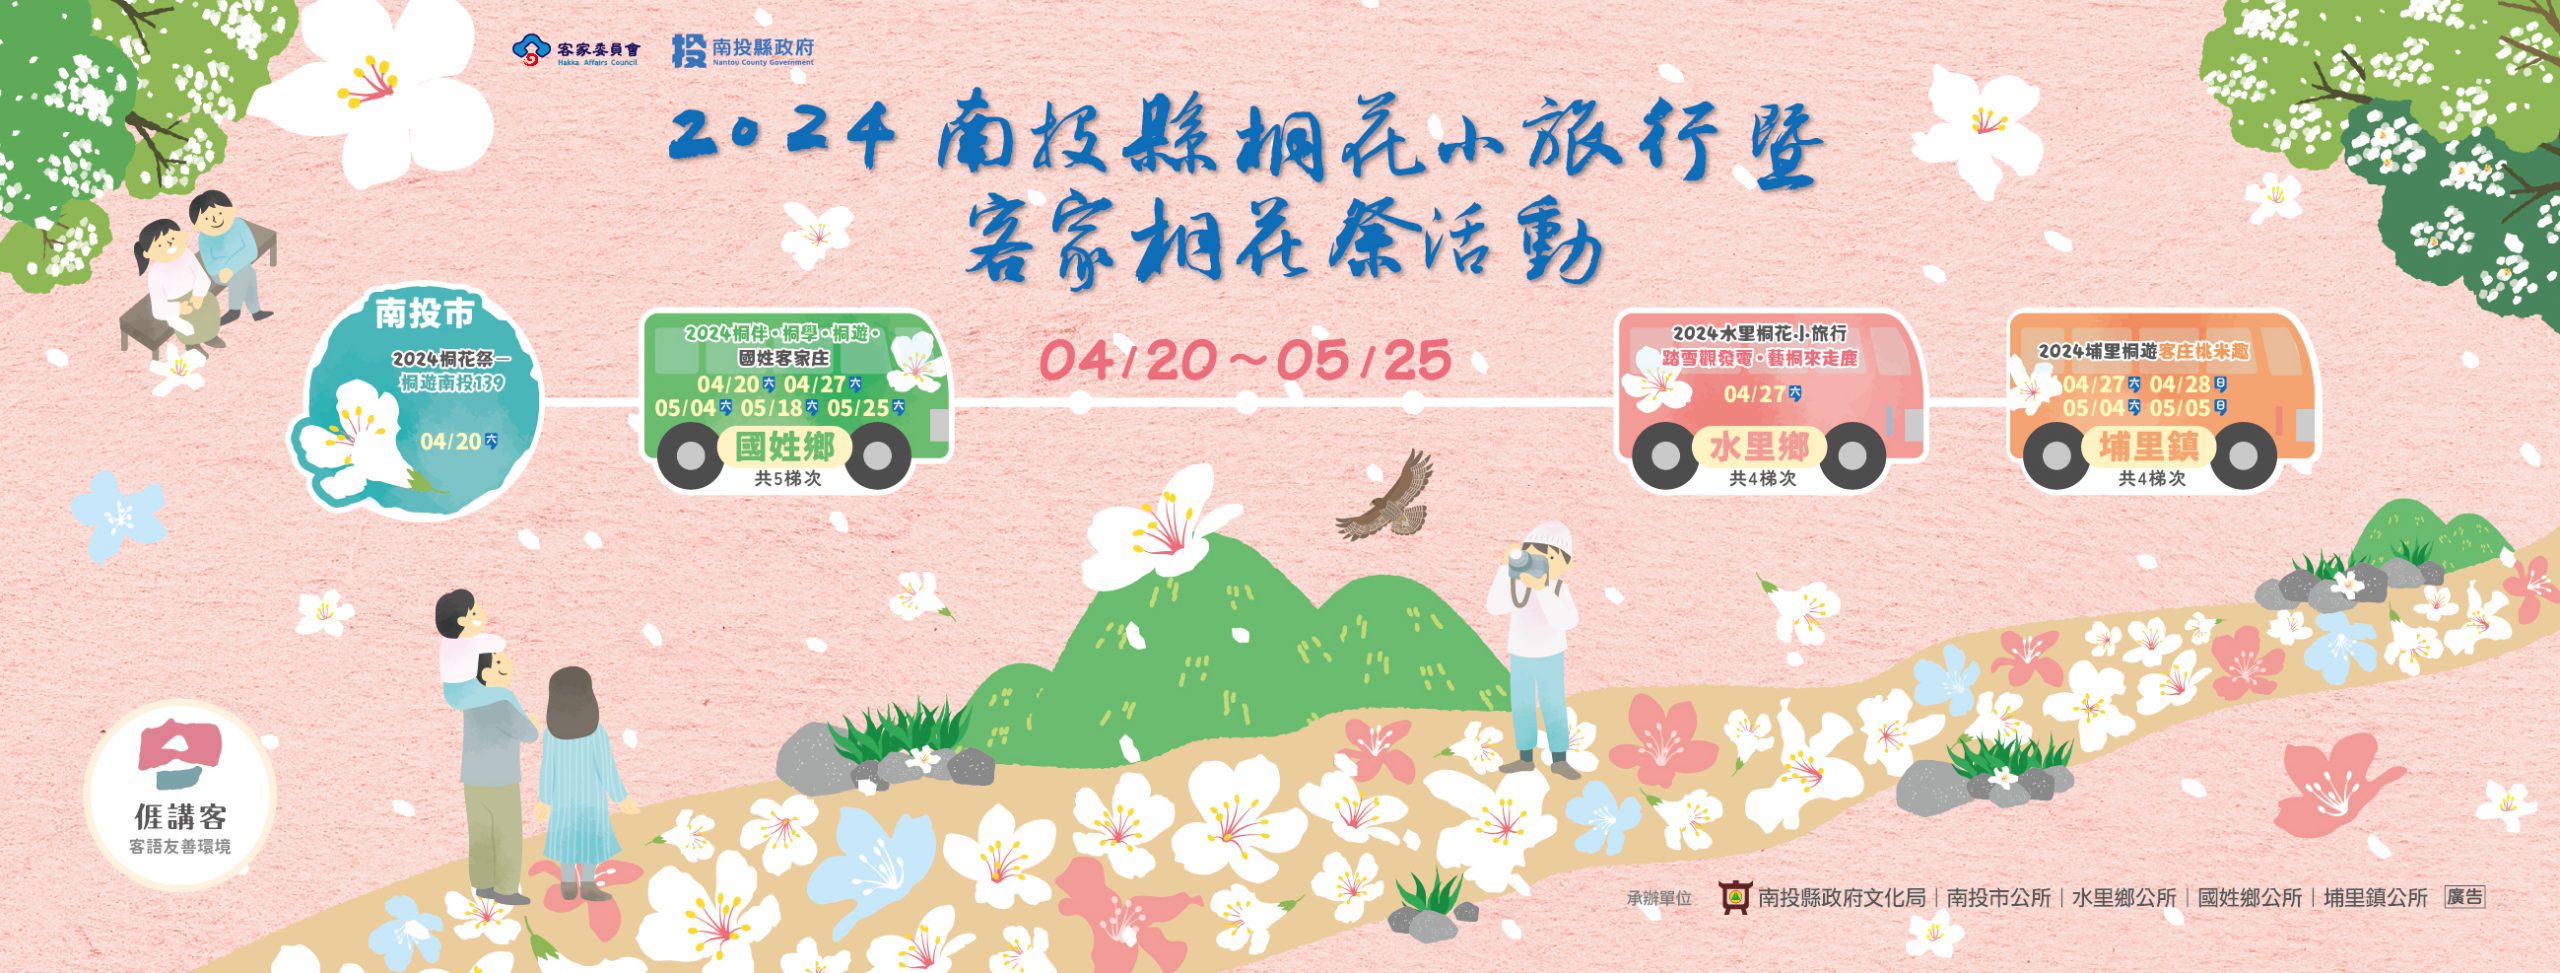 Nantou County’s Tung Blossom Small Tours and Hakka Tung Blossom Festival will kick off on the 20th with various towns and townships taking turns to host the events.